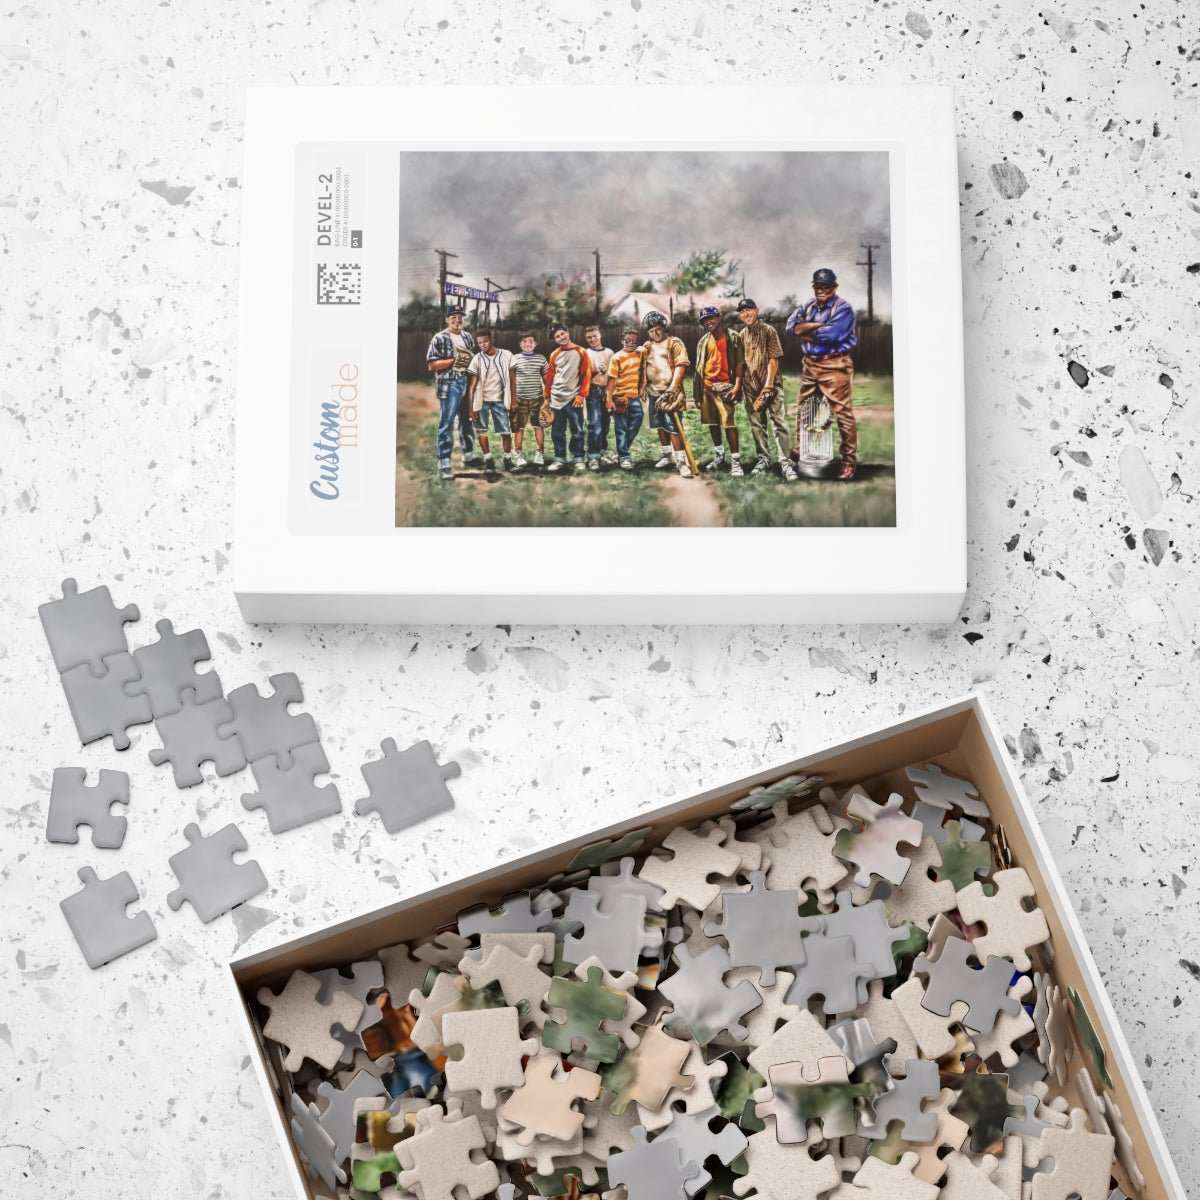 FOR-HOU-STON | Limited Edition Puzzle - Androo's Art